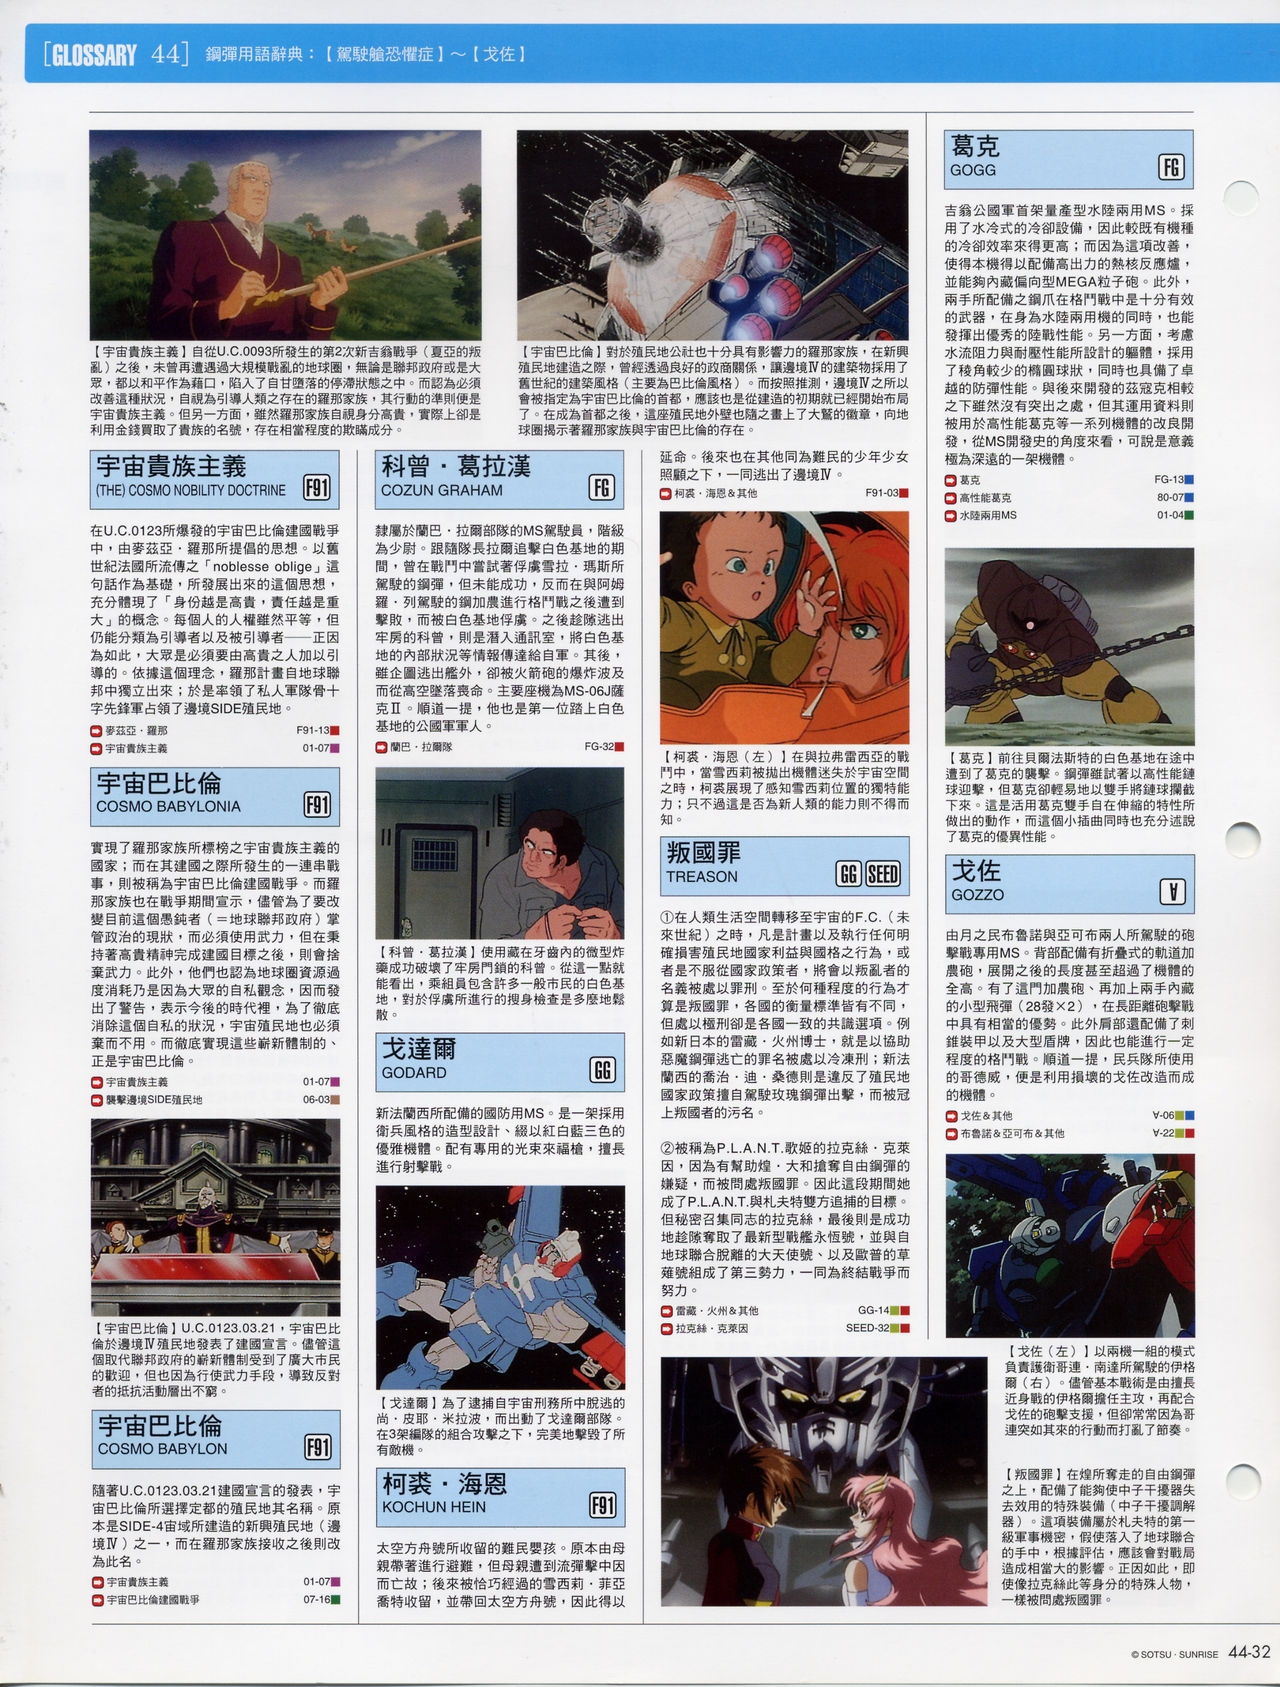 The Official Gundam Fact File - 044 [Chinese] 34